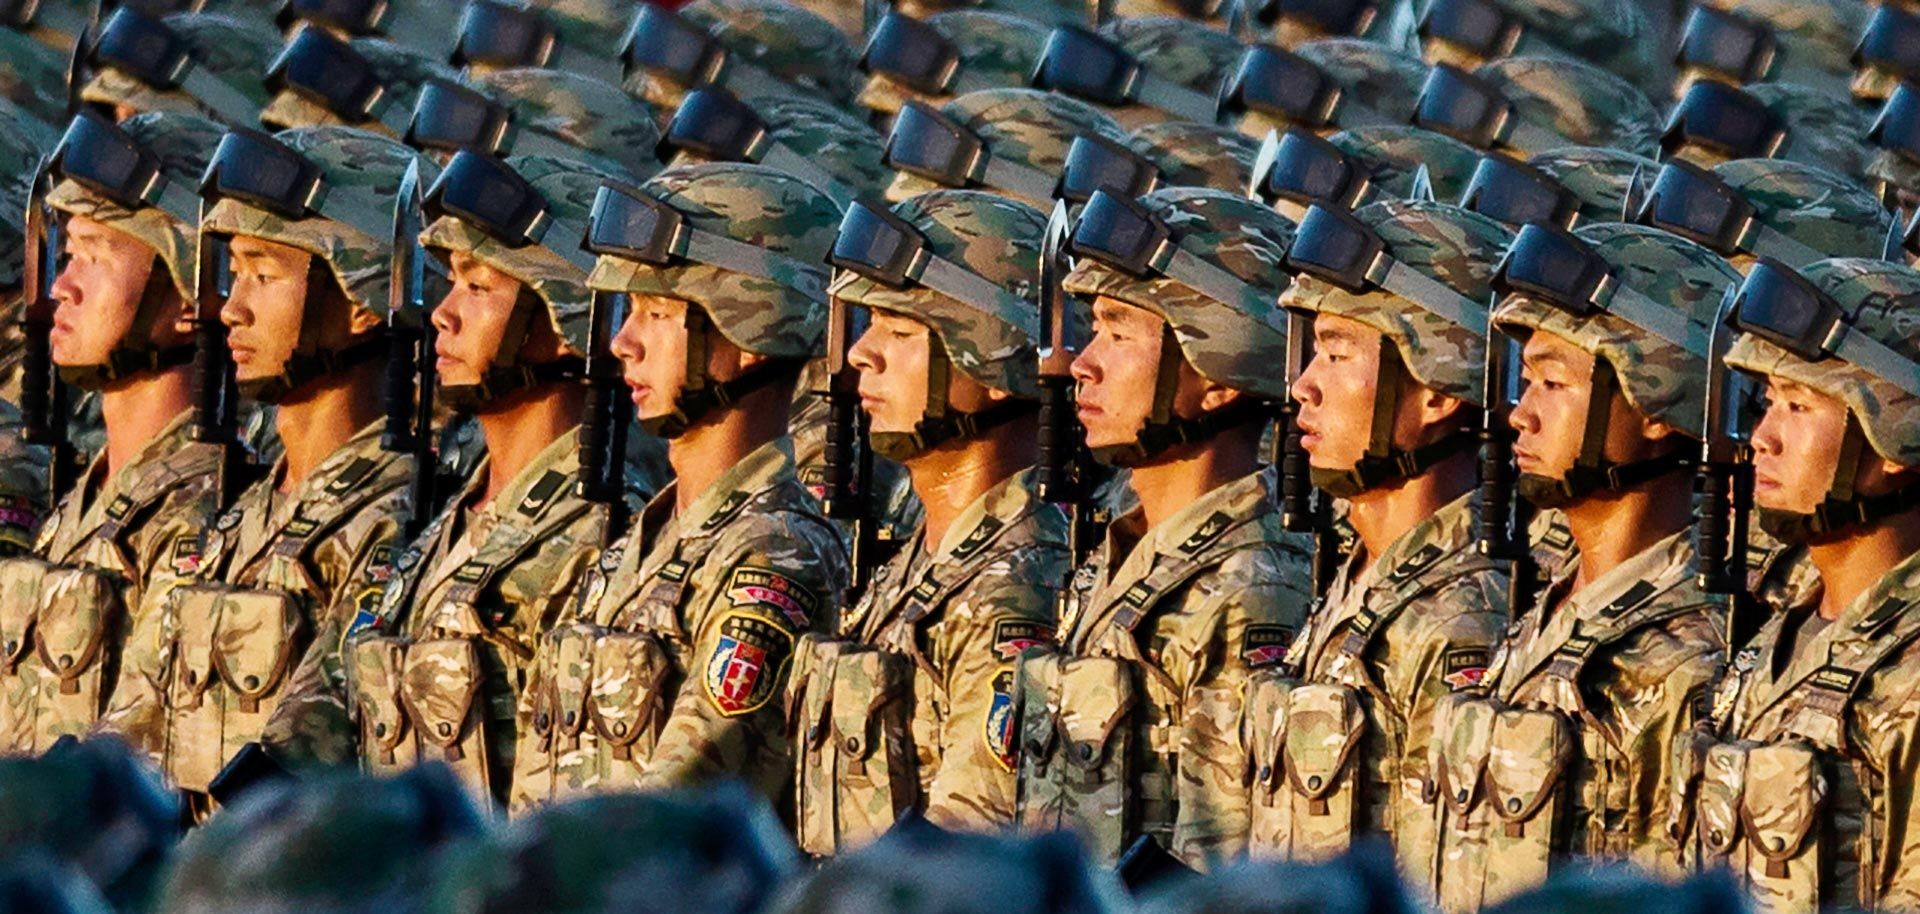 The restructuring of the Chinese military's general staff system will help Beijing consolidate control and make the military more capable of performing modern joint operations.